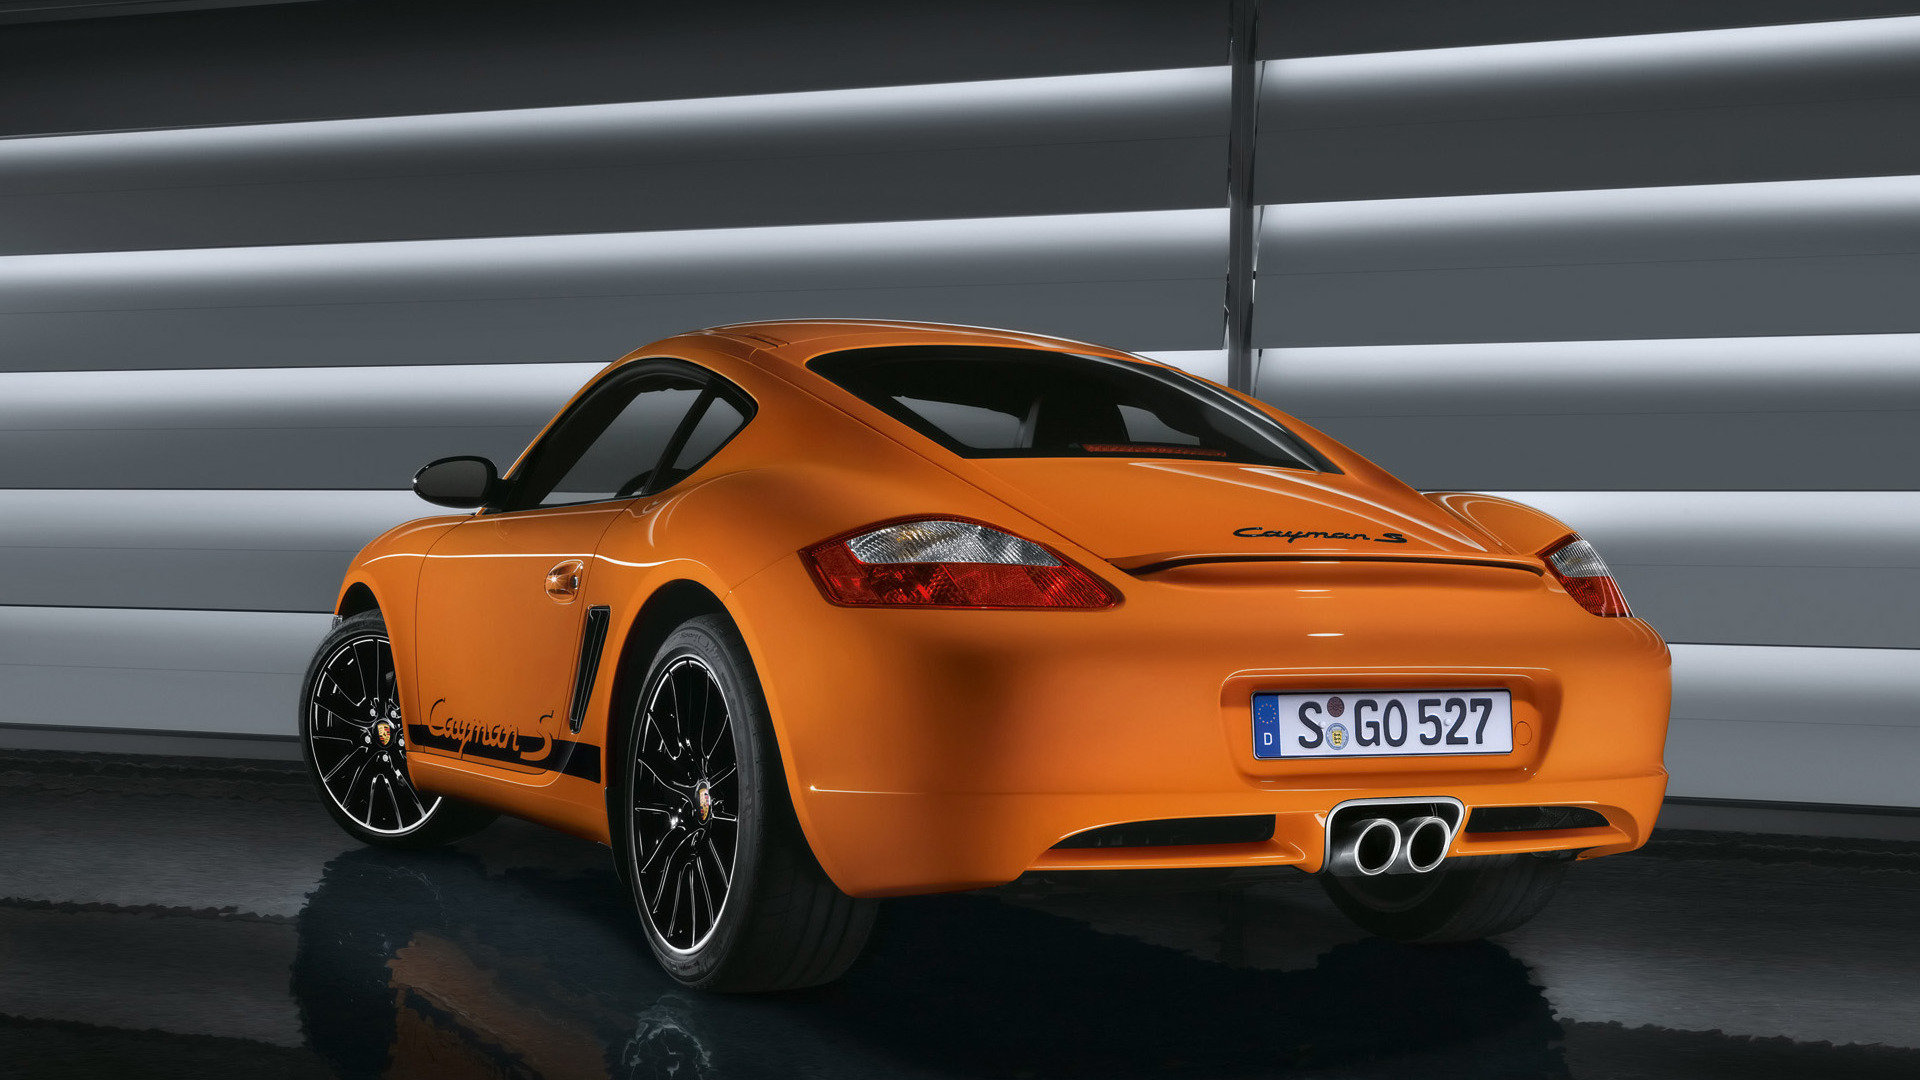 Awesome Porsche free wallpaper ID:19528 for hd 1920x1080 computer